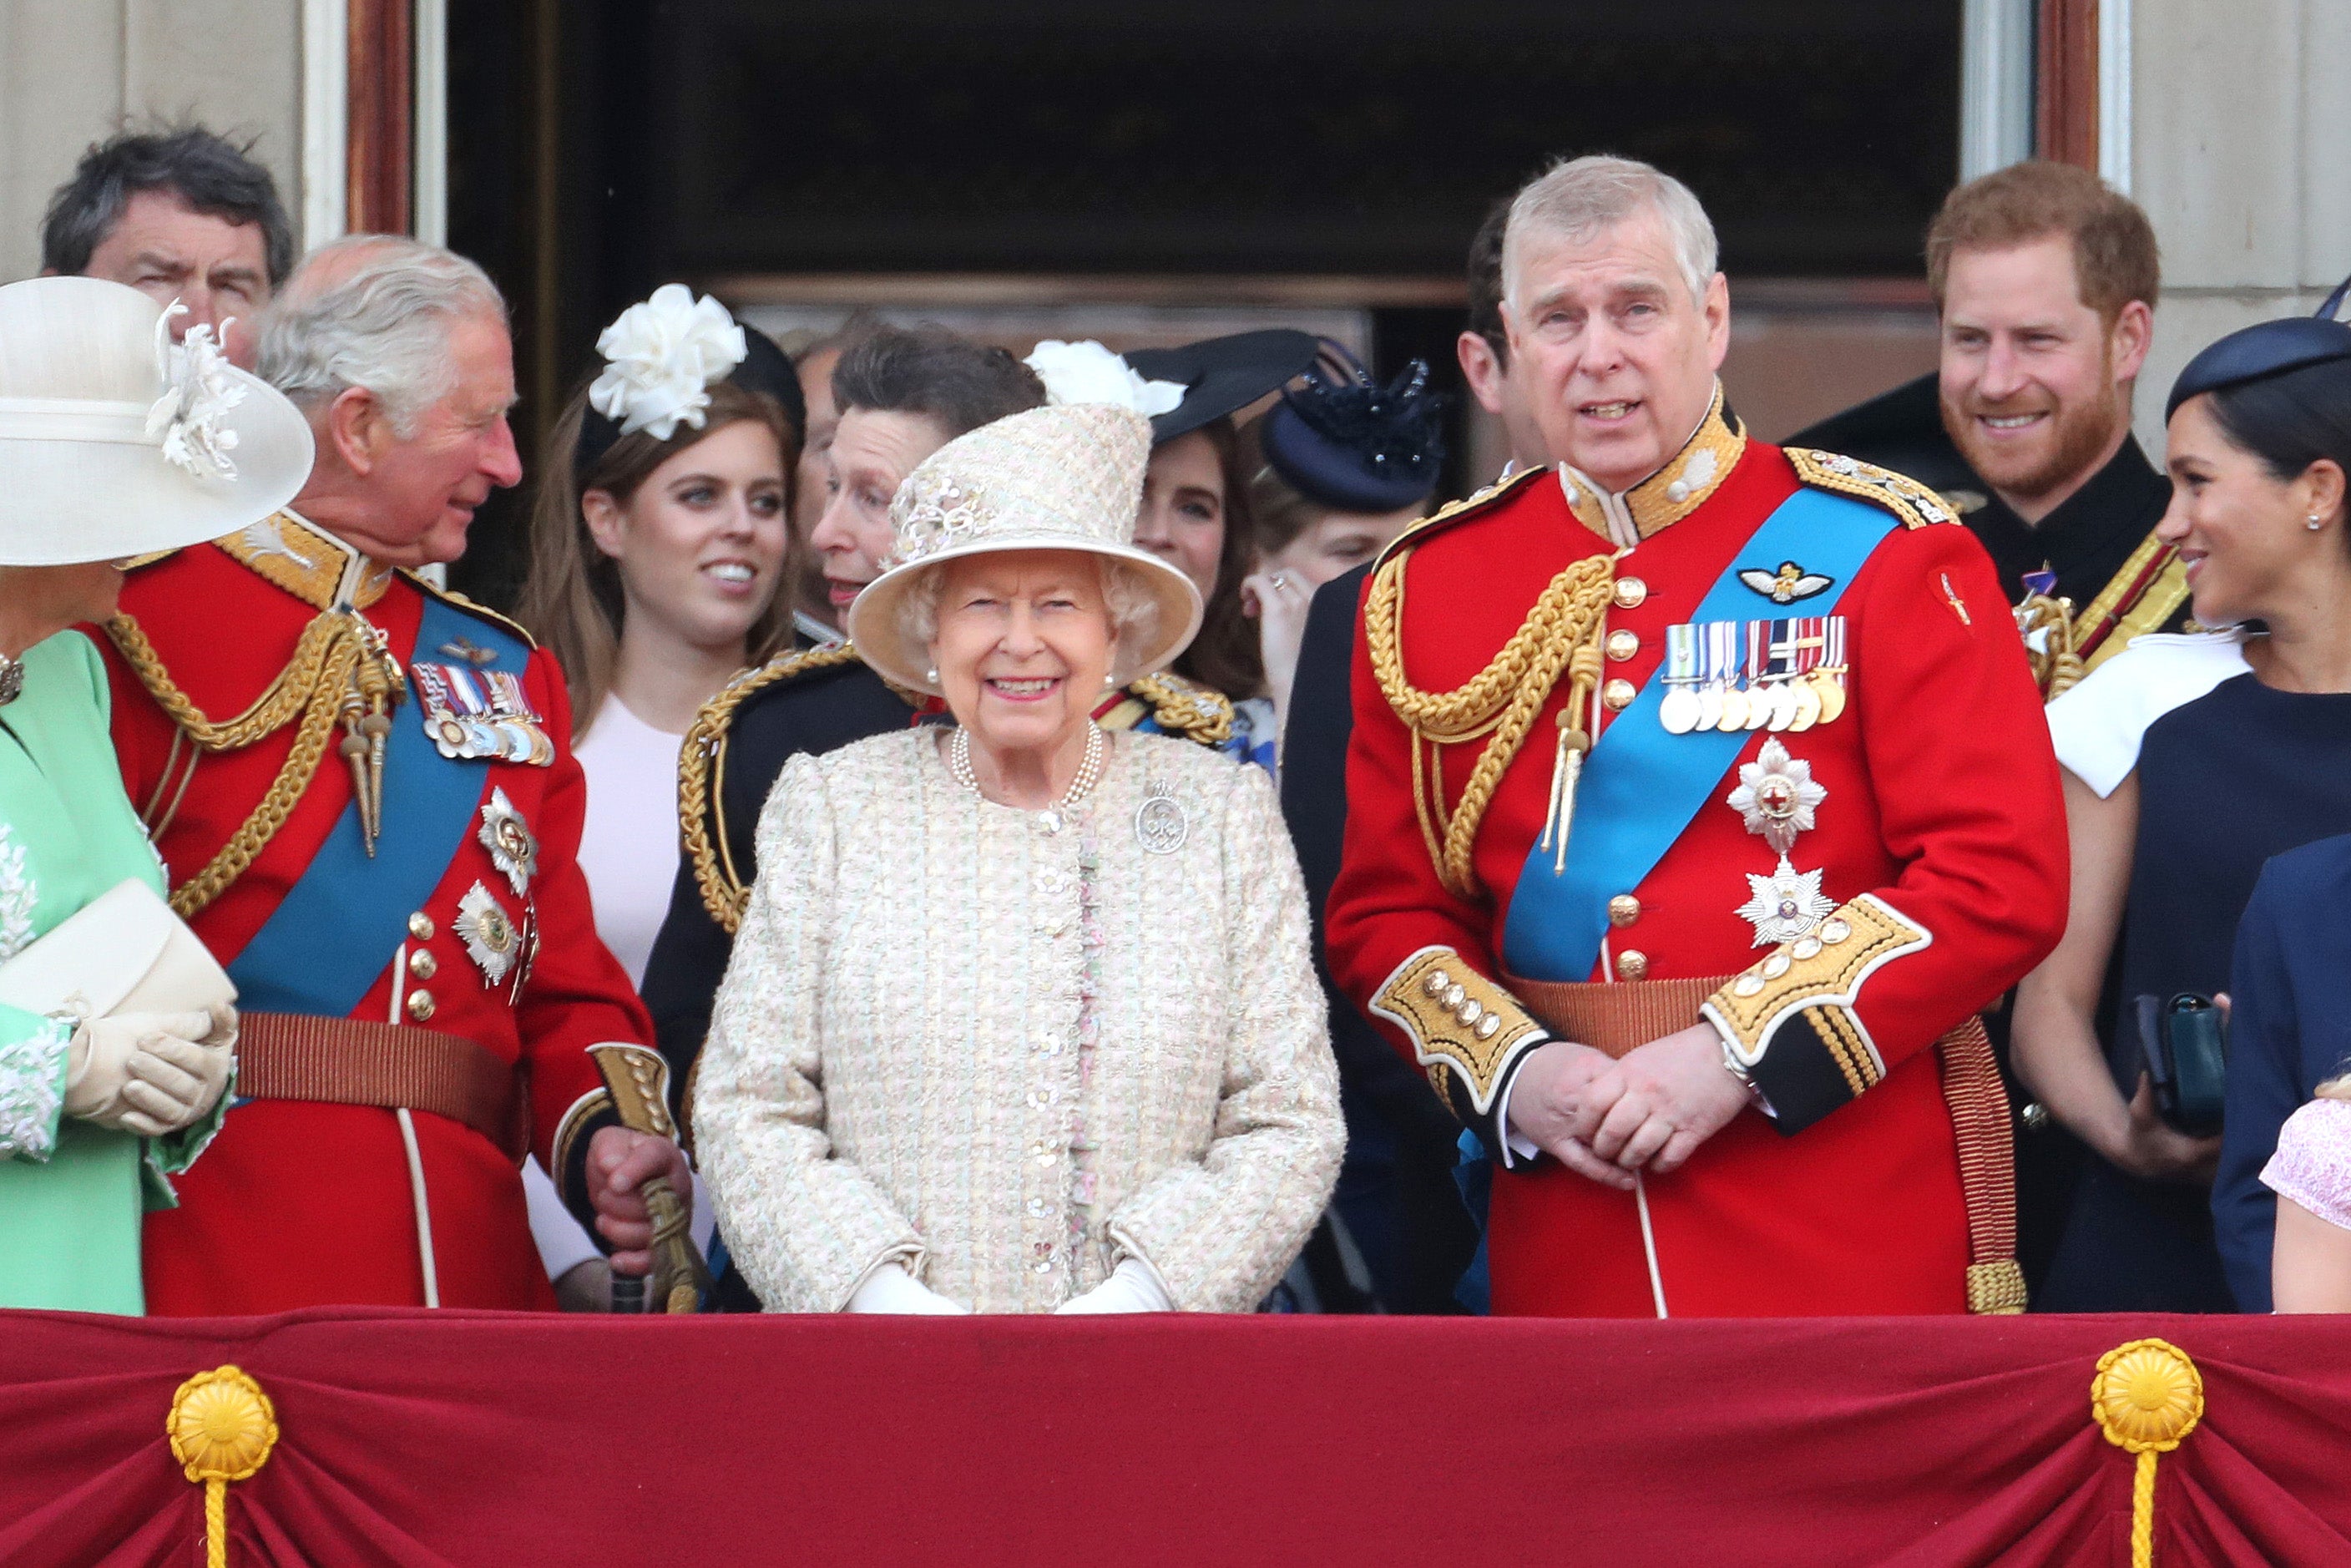 The scandal surrounding Prince Andrew is overshadowing the Queen’s Platinum Jubilee celebrations, his biographer says